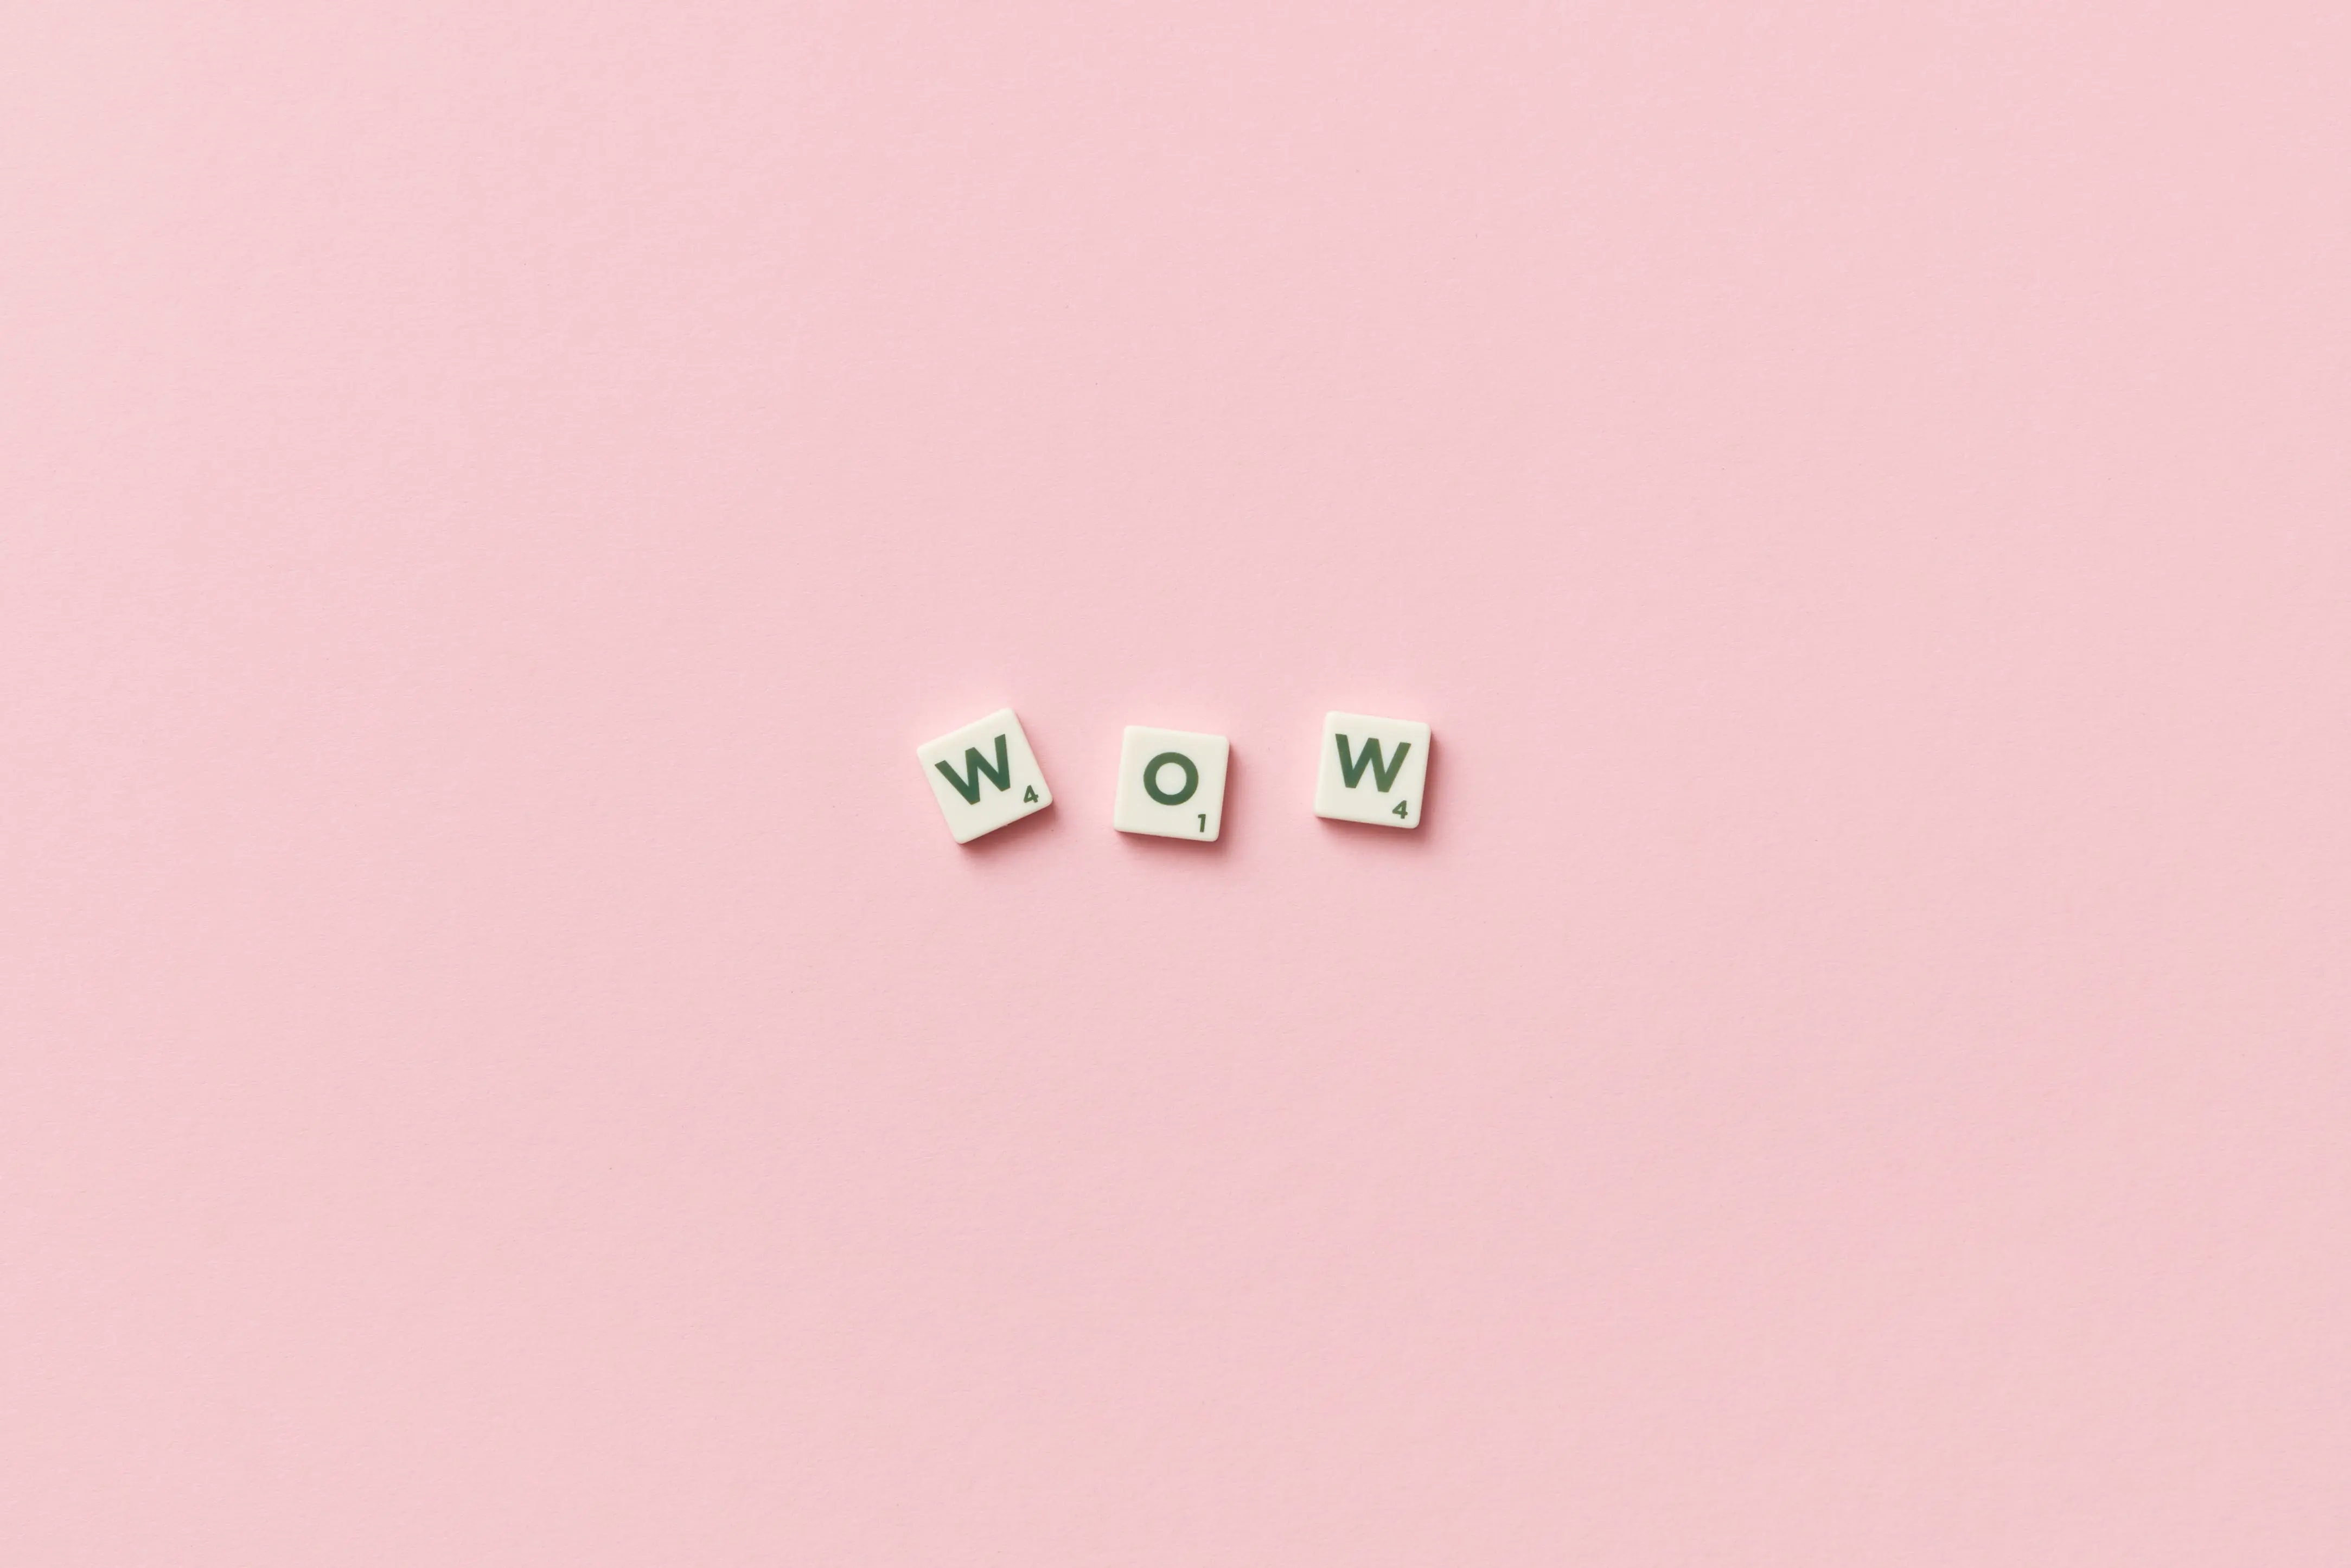 Three Scrabble letters form the word Wow.